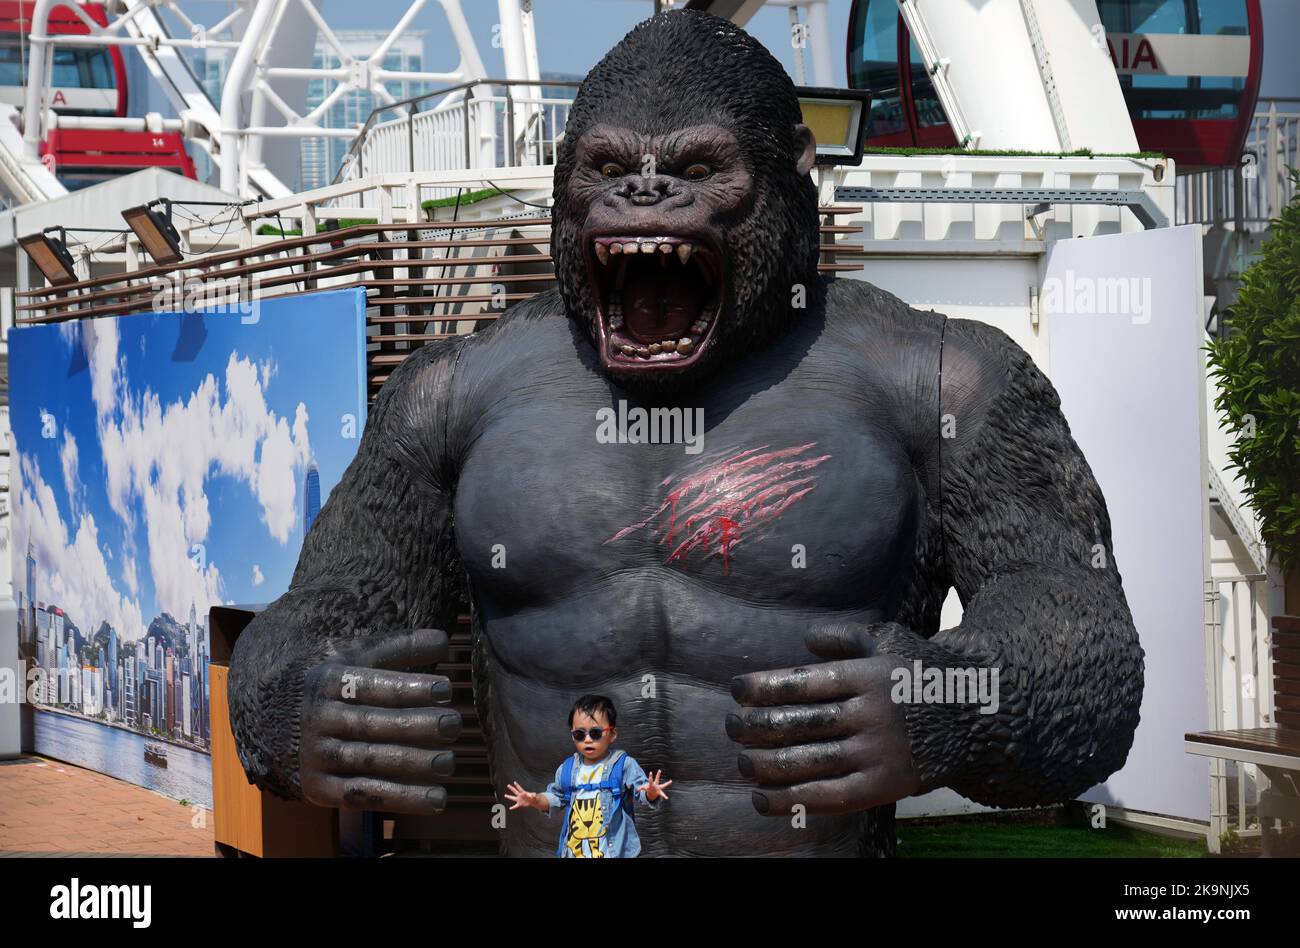 A boy poses for pictures with a gorilla sculpture in Central. 24OCT22 ...